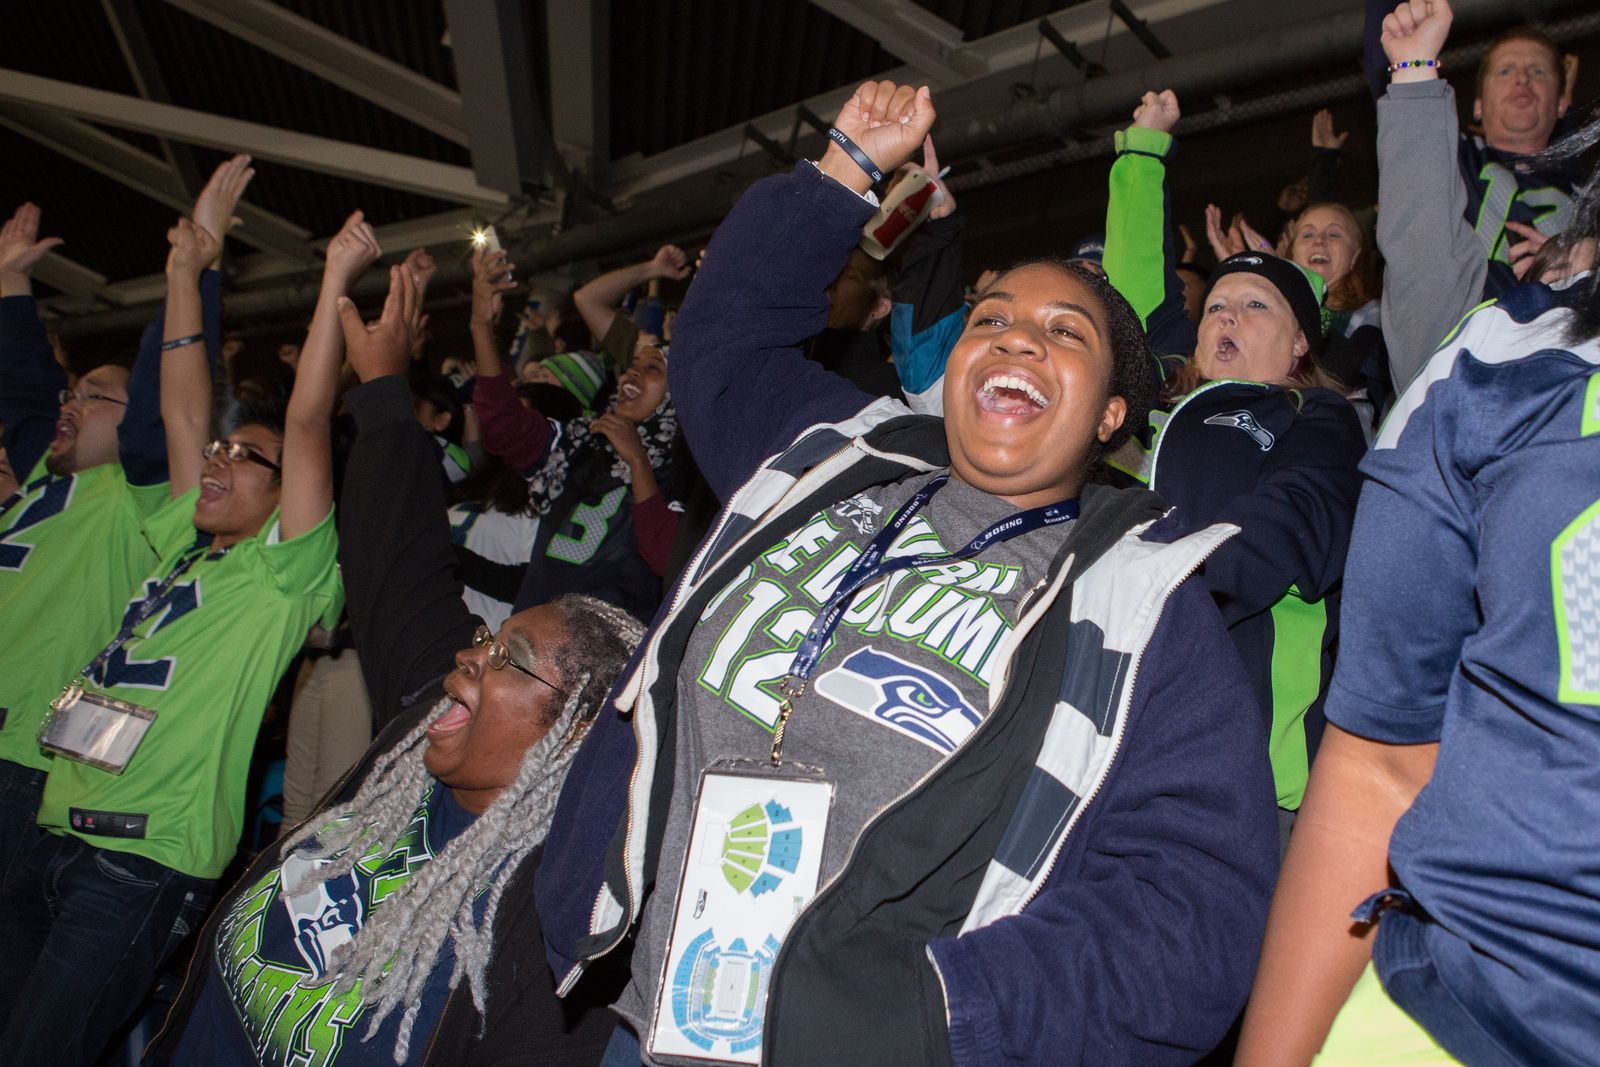 A group of seattle seahawks fans cheering in the stands.